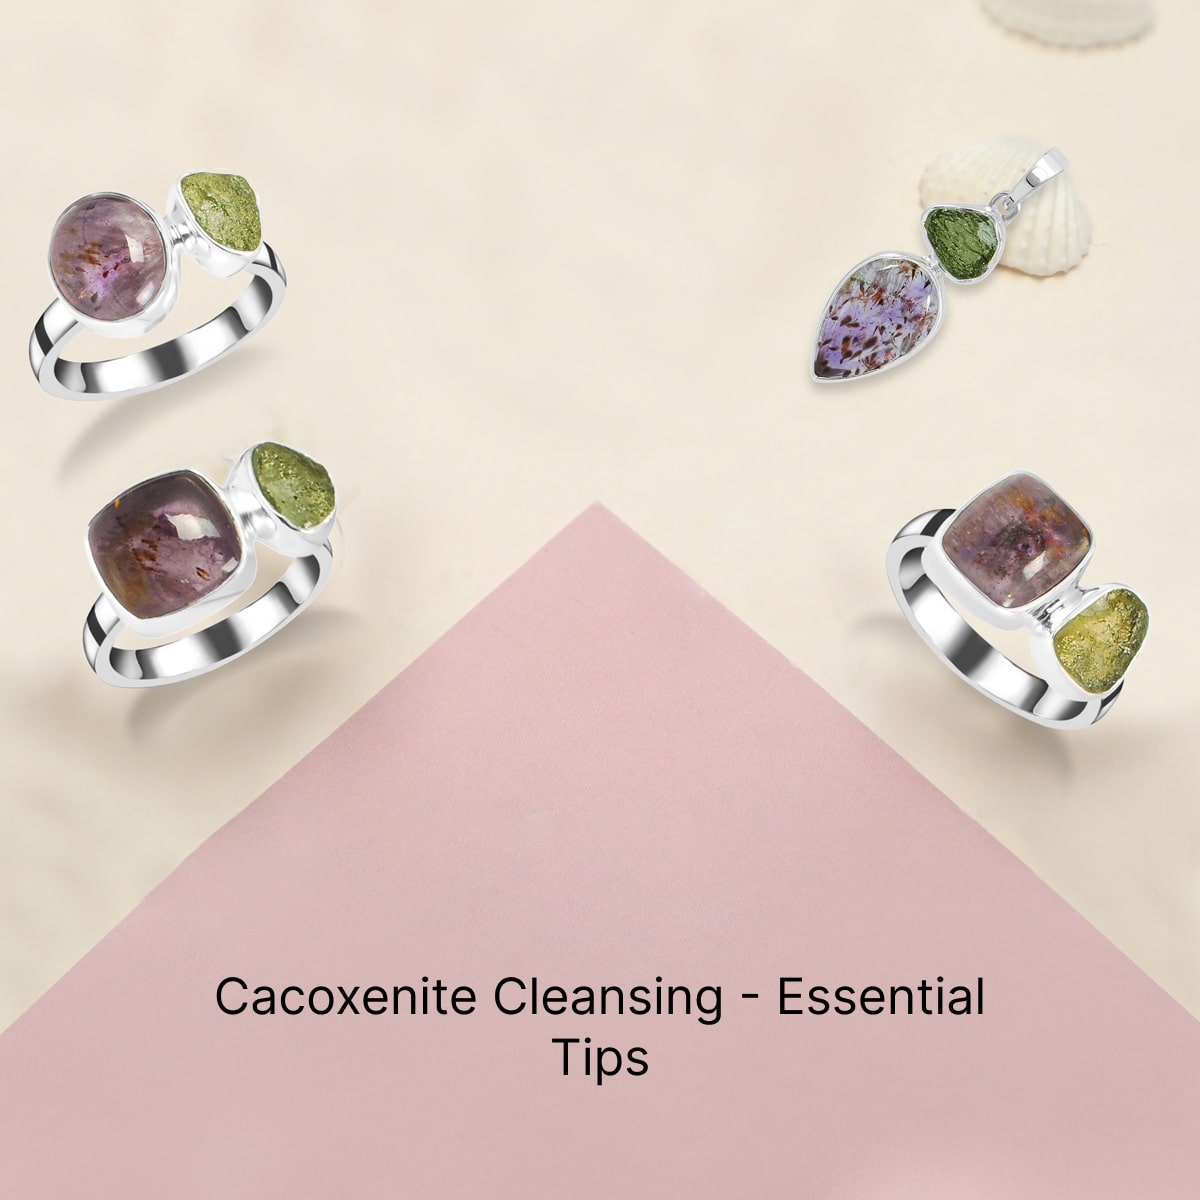 How To Cleanse The Cacoxenite